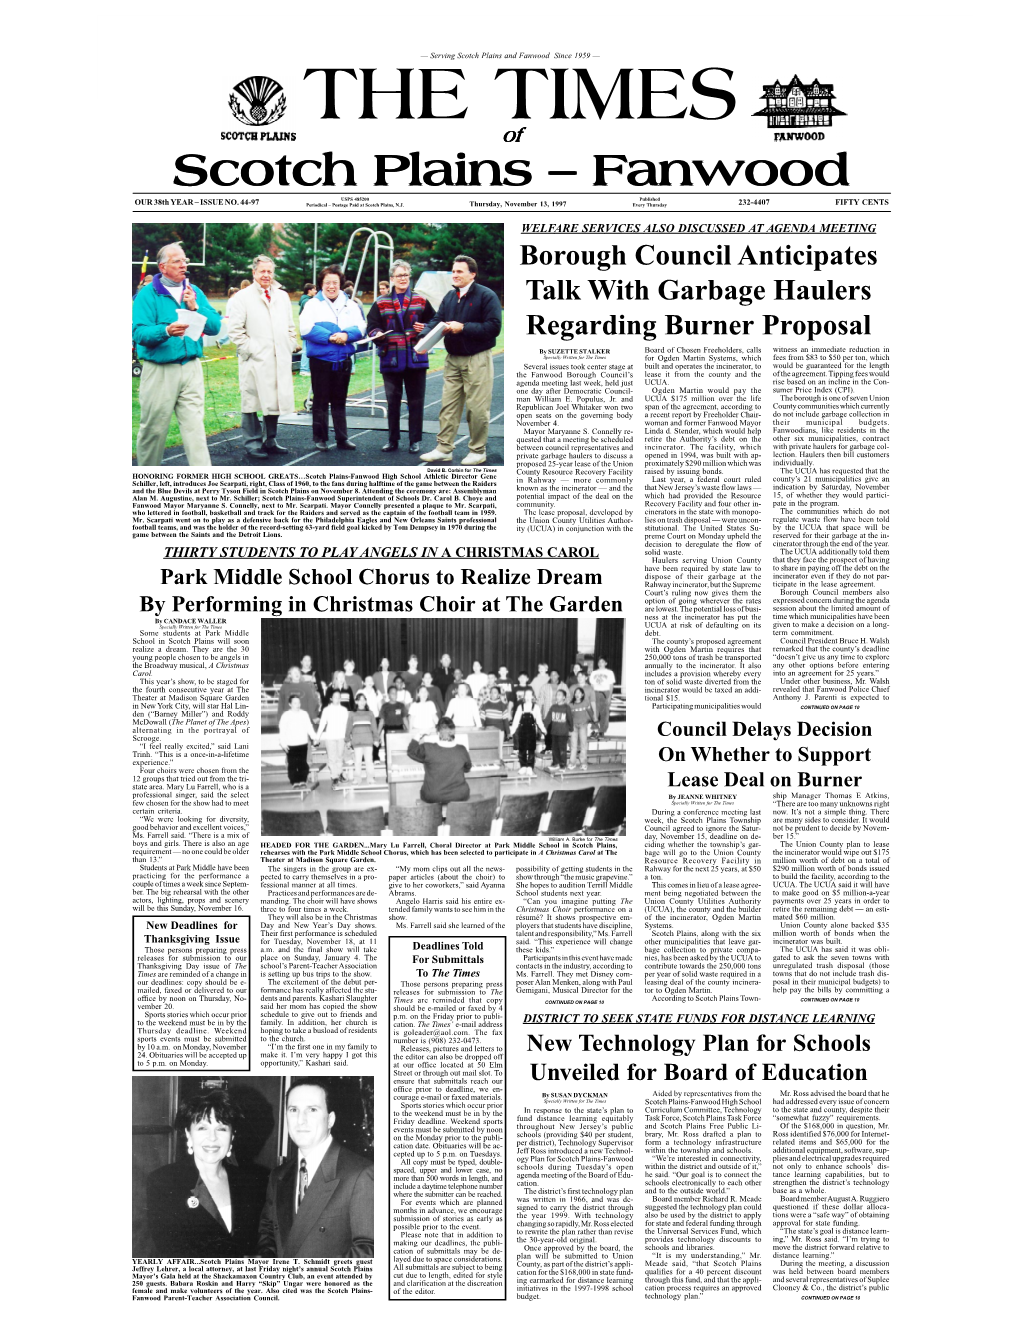 THE TIMES of Scotch Plains – Fanwood Thursday, November 13, 1997 Page 10 the Westfield Leader— Serving Scotch Plains and Fanwood Since 1959 —